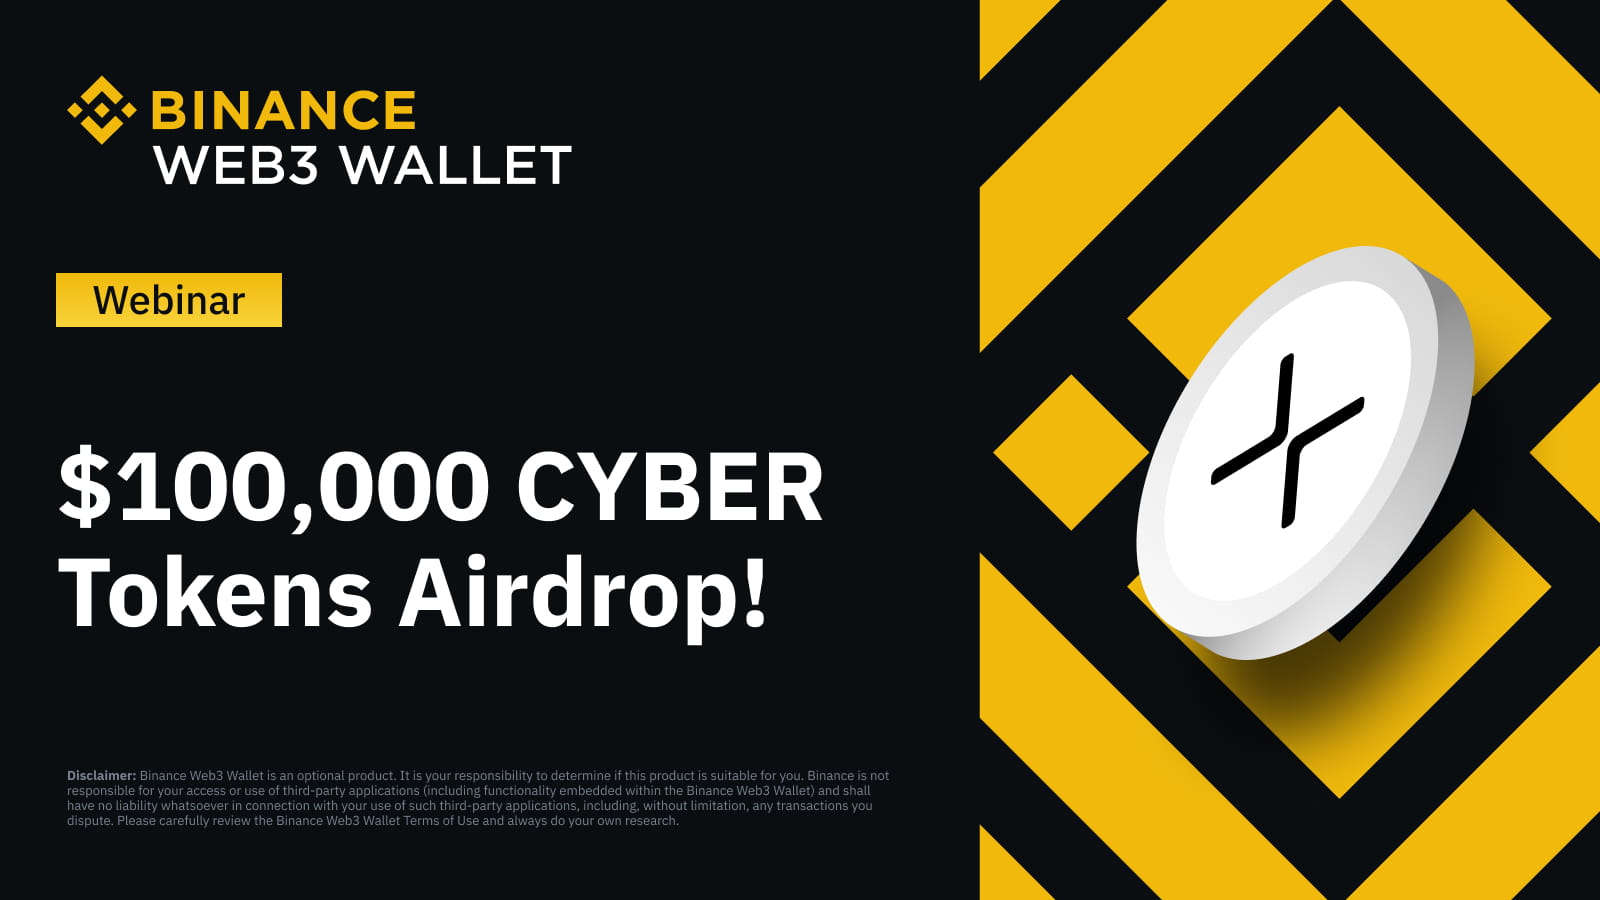 How to Participate on the $100,000 Cyber Token Airdrop!